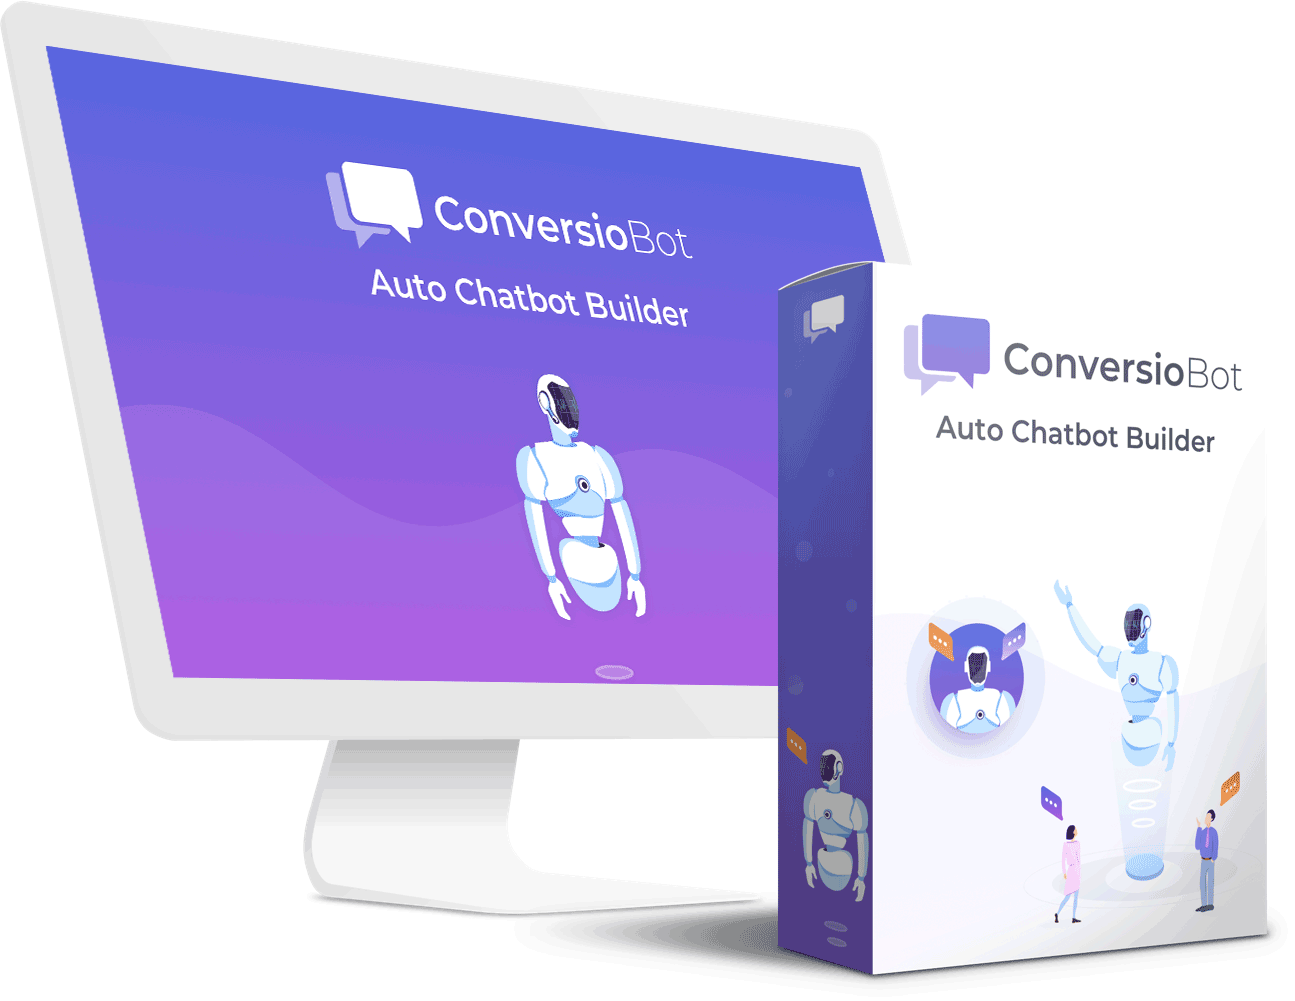 ConversioBot - ONE Line Of “Automated Bot Code" To Exploit a NEW AI ChatRobot